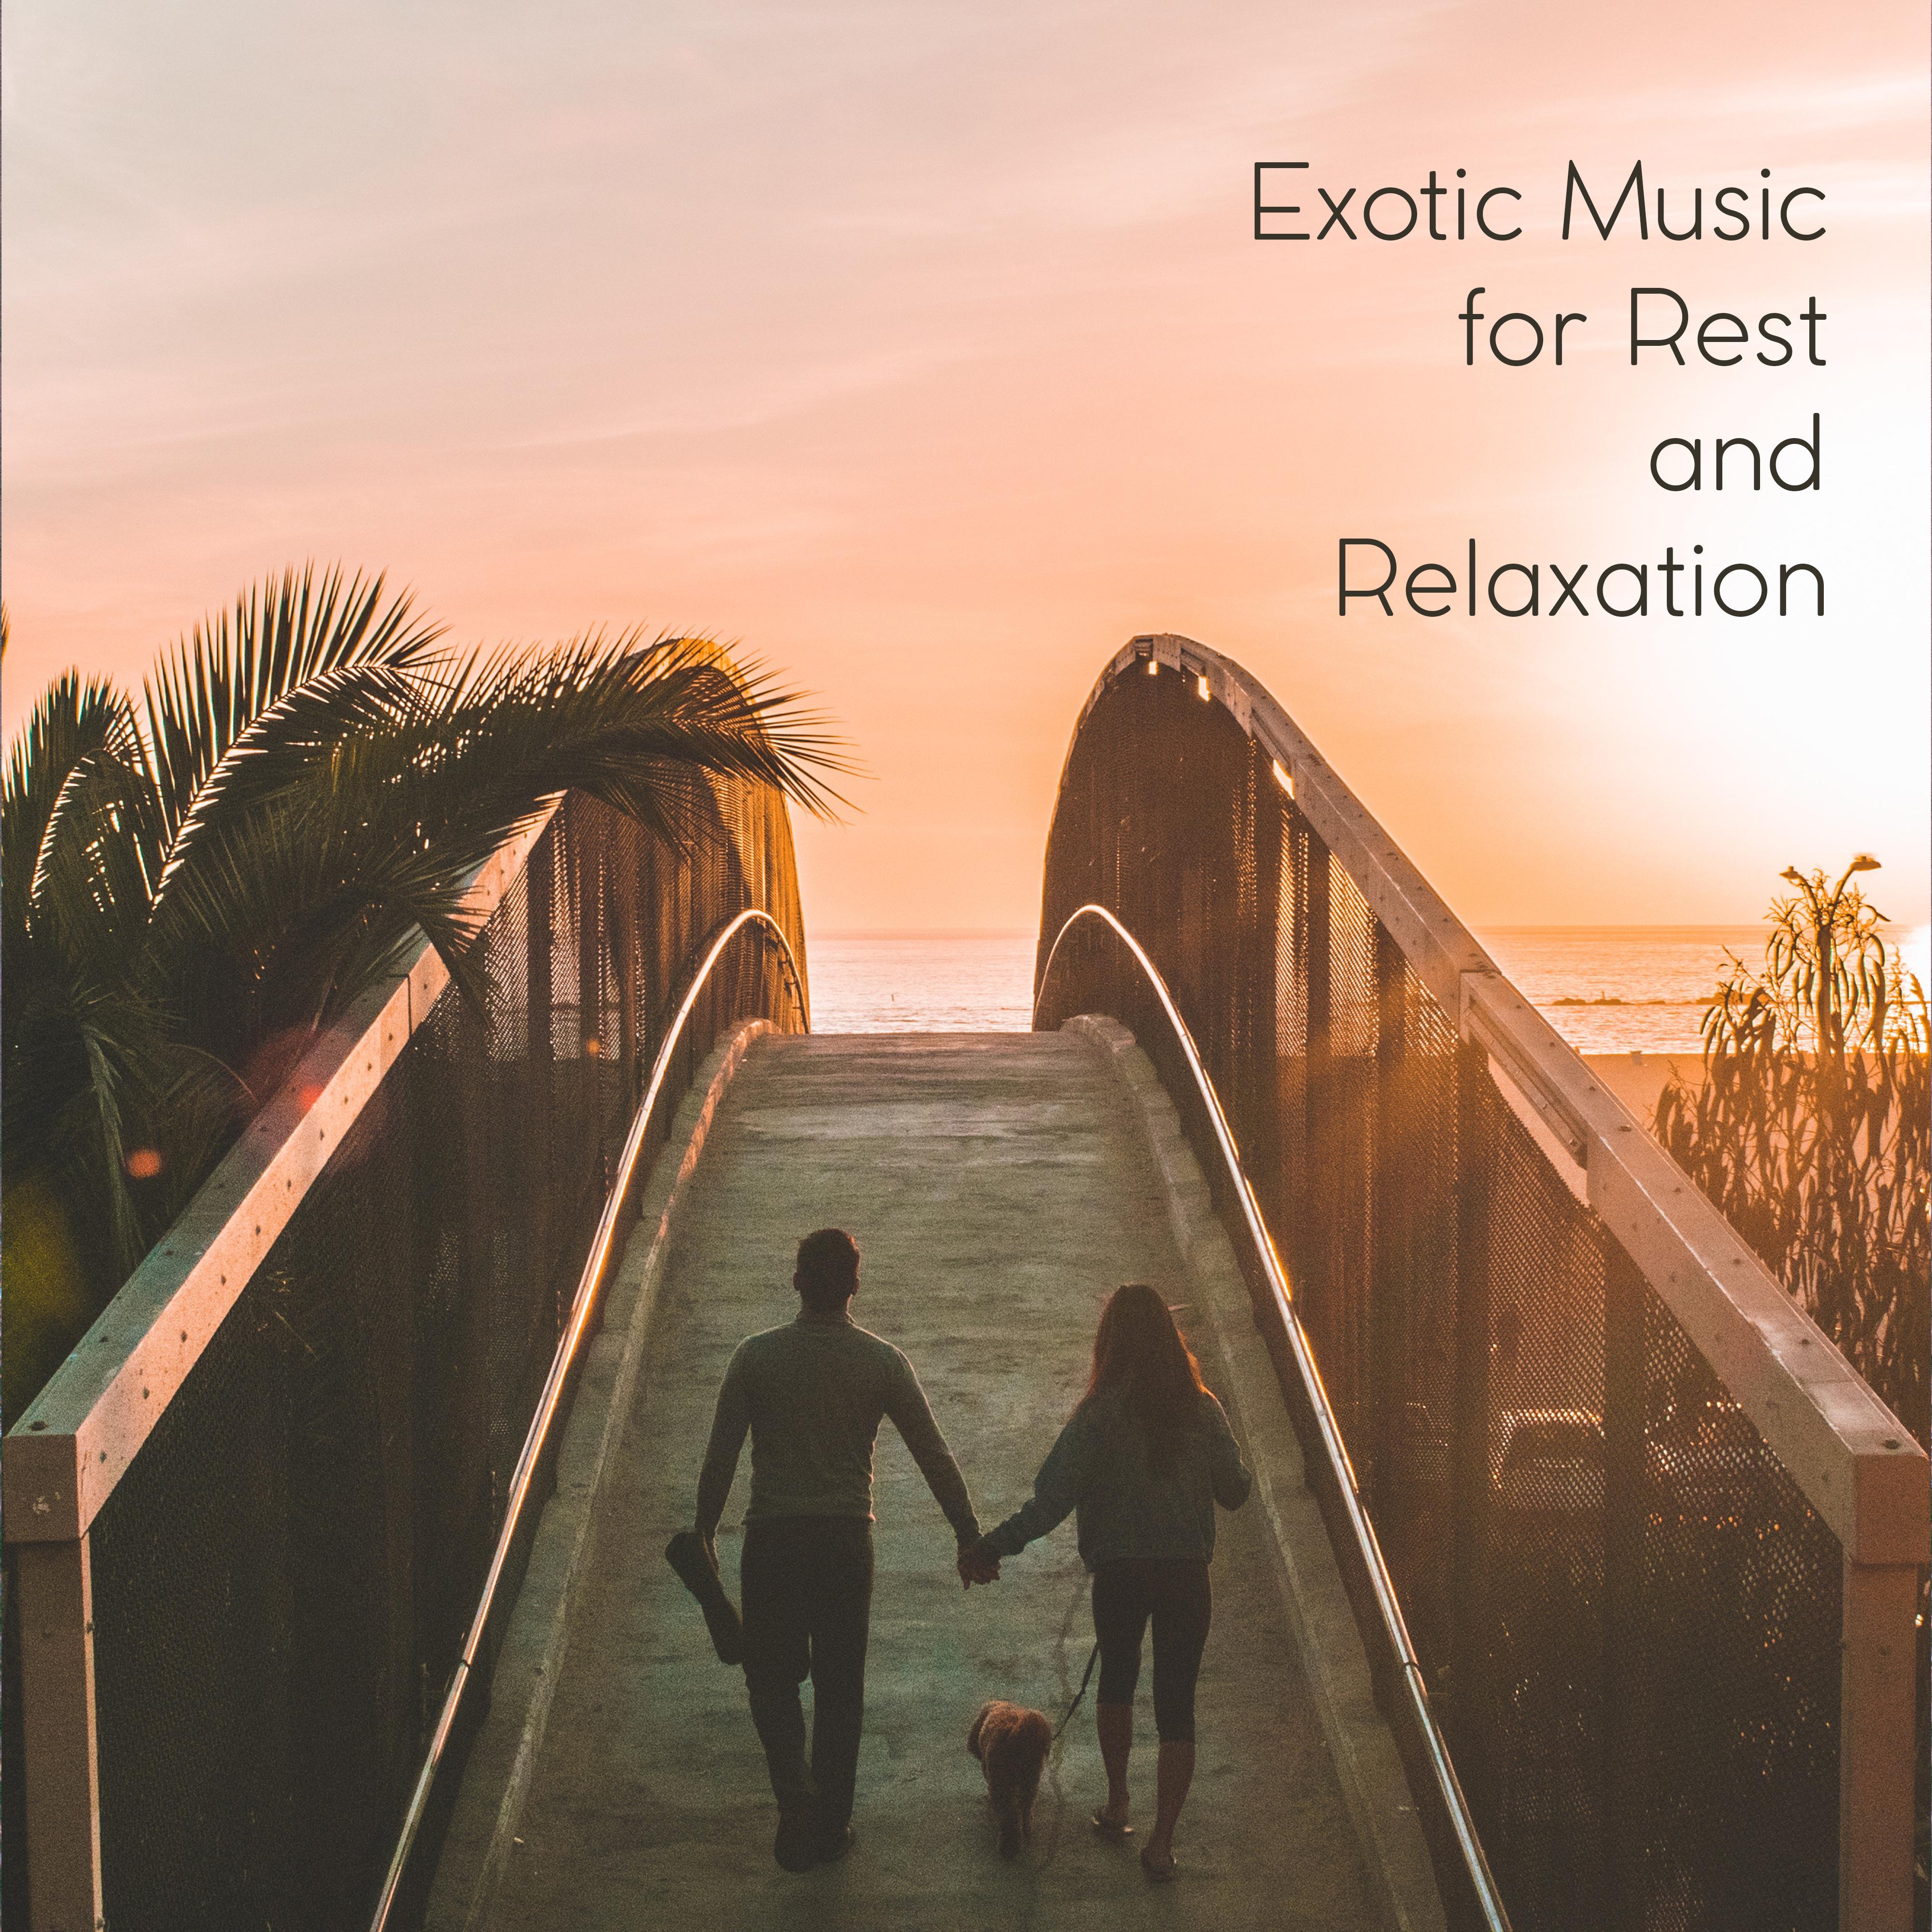 Exotic Music for Rest and Relaxation